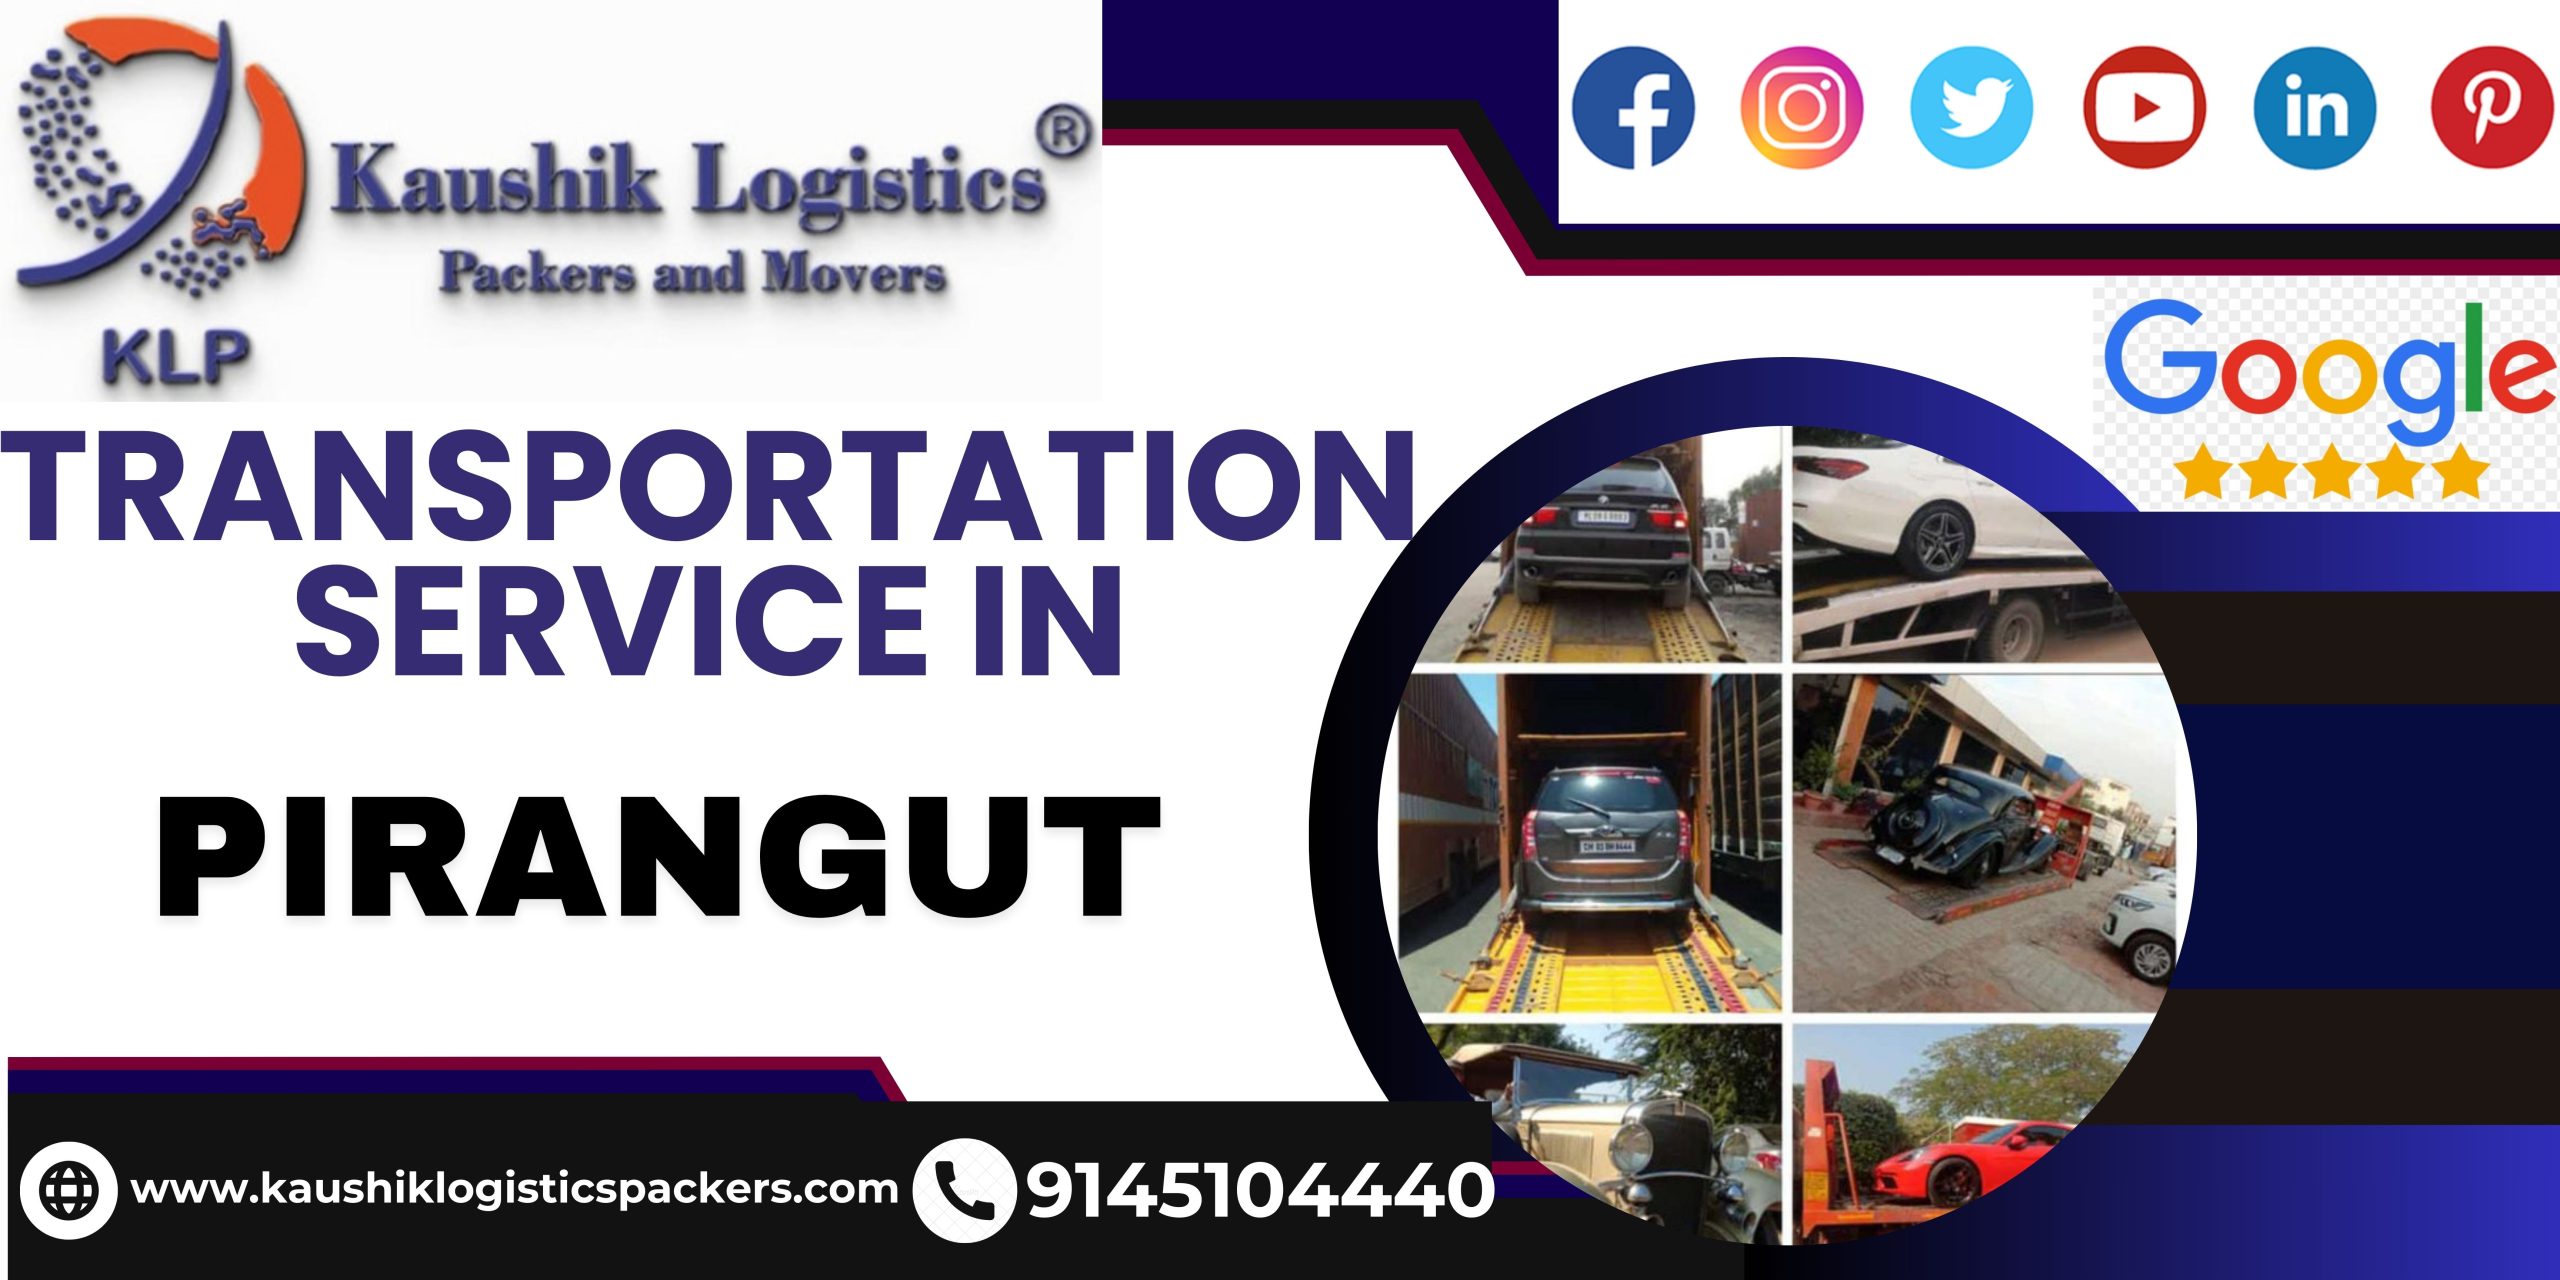 Packers and Movers In Pirangut